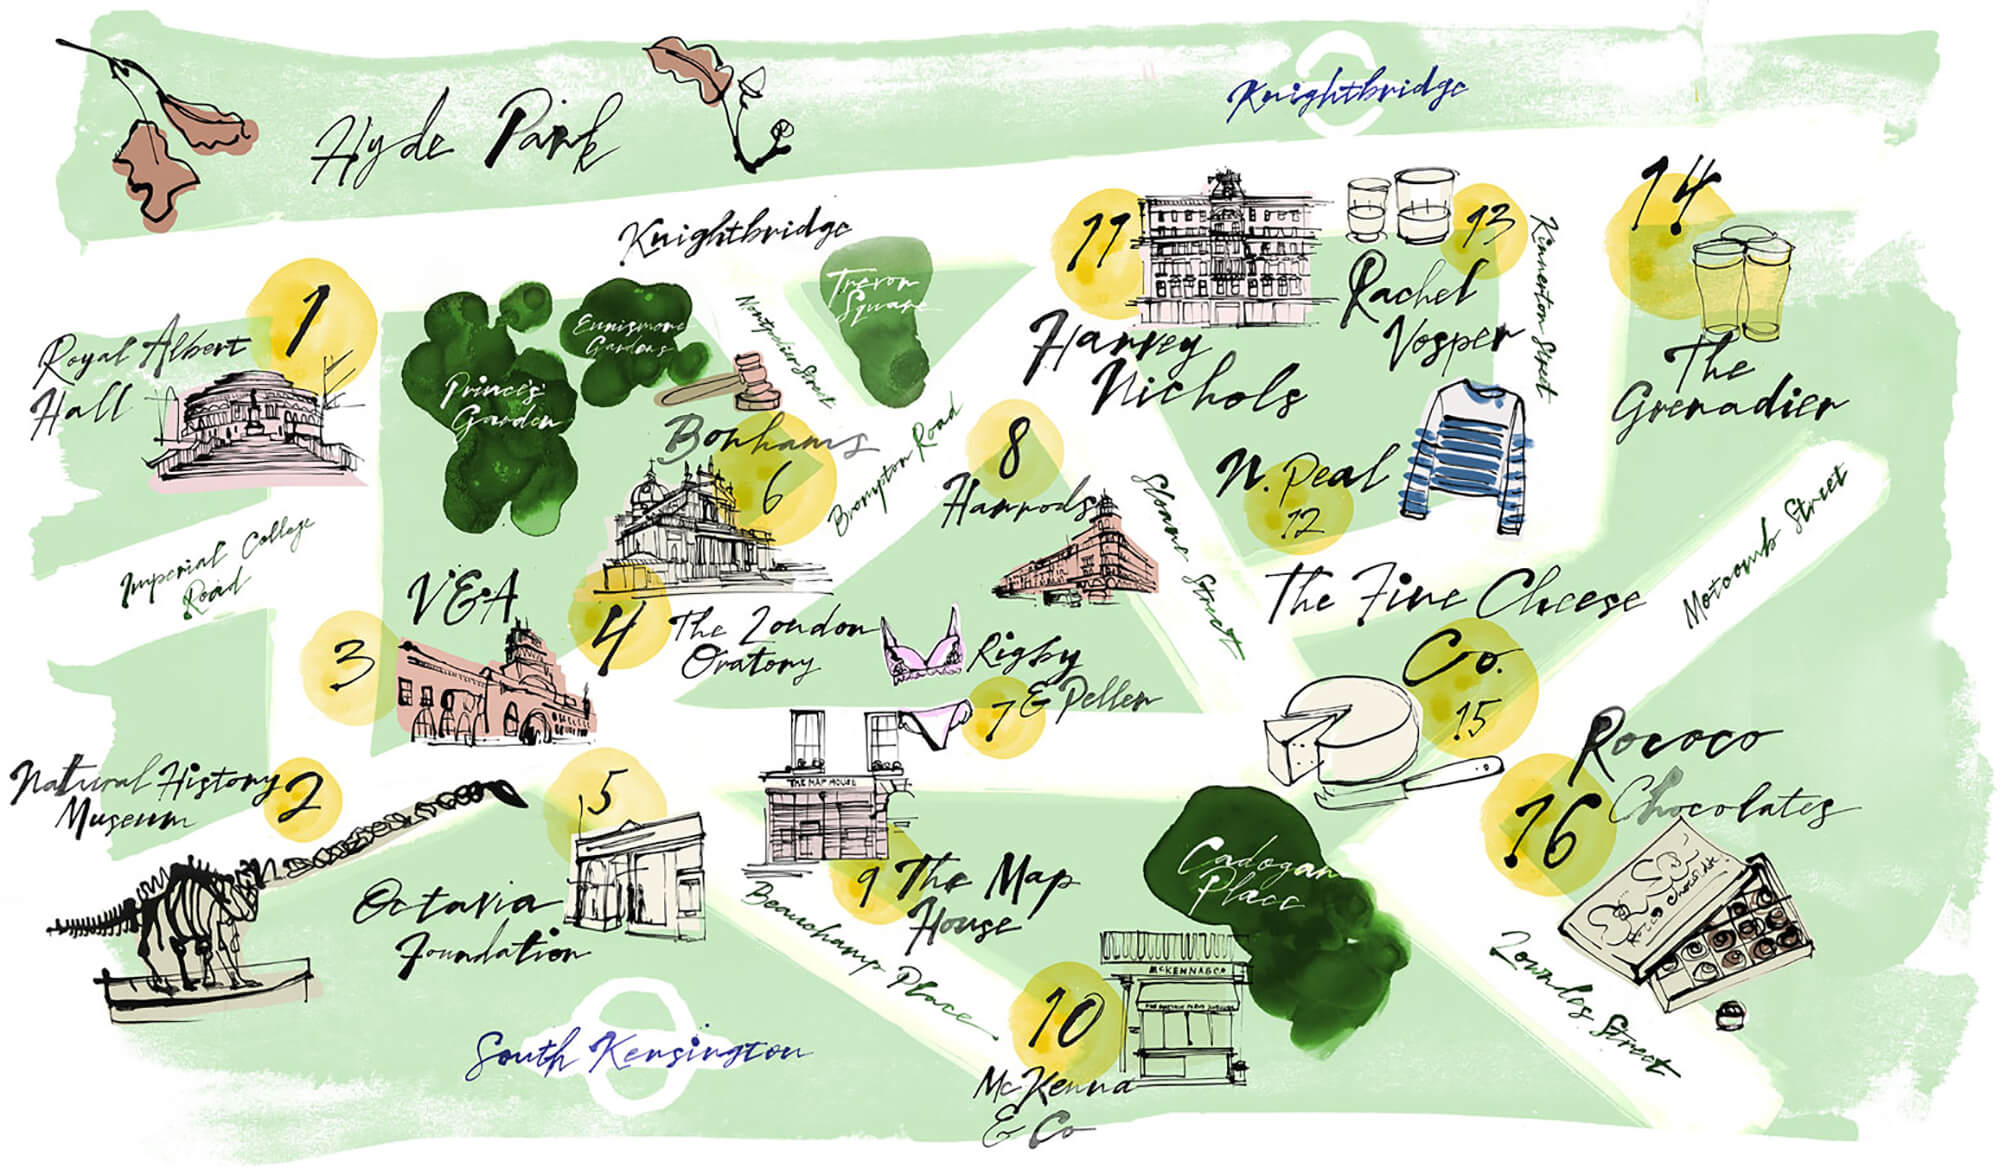 A hand drawn map of West London for Hilton Hotels. South Kensington and Knightsbridge Neighbourhood Gems Illustrated Map